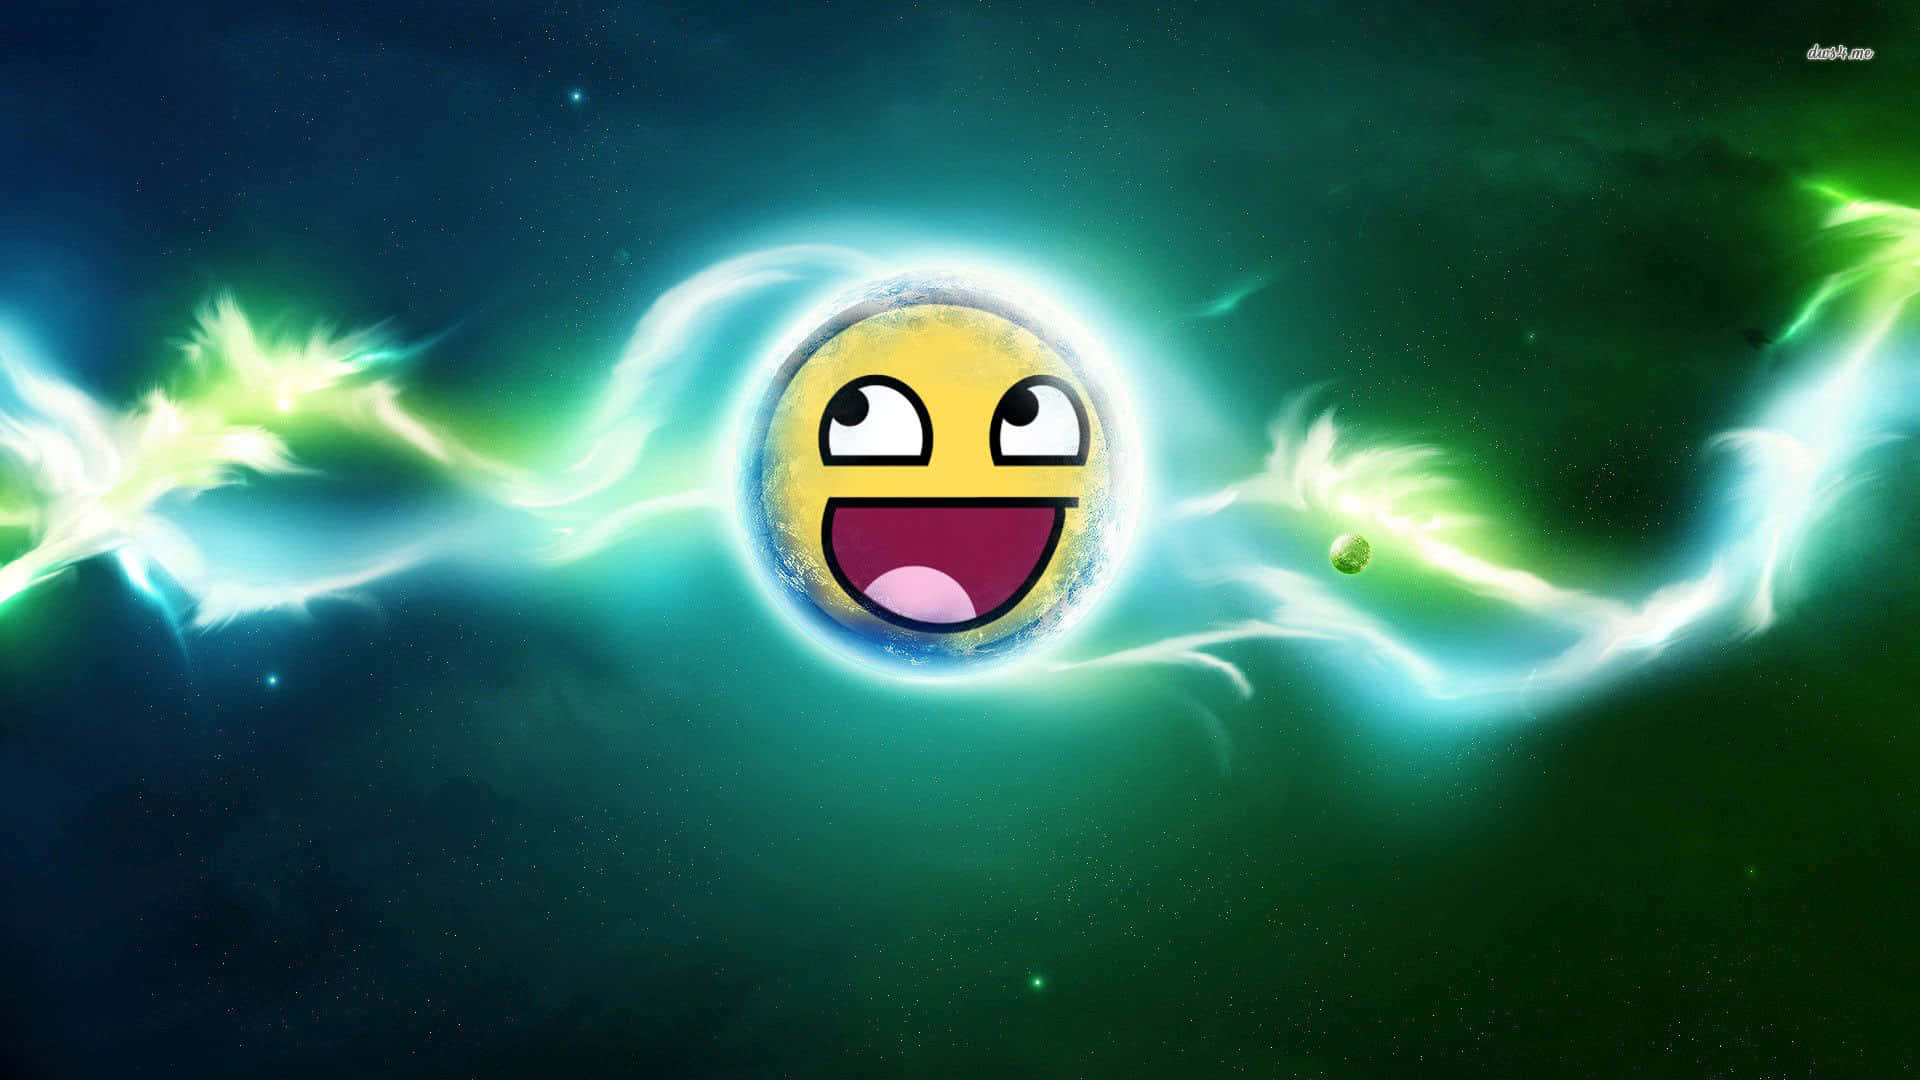 A Green And Blue Emoji With A Smiley Face Wallpaper